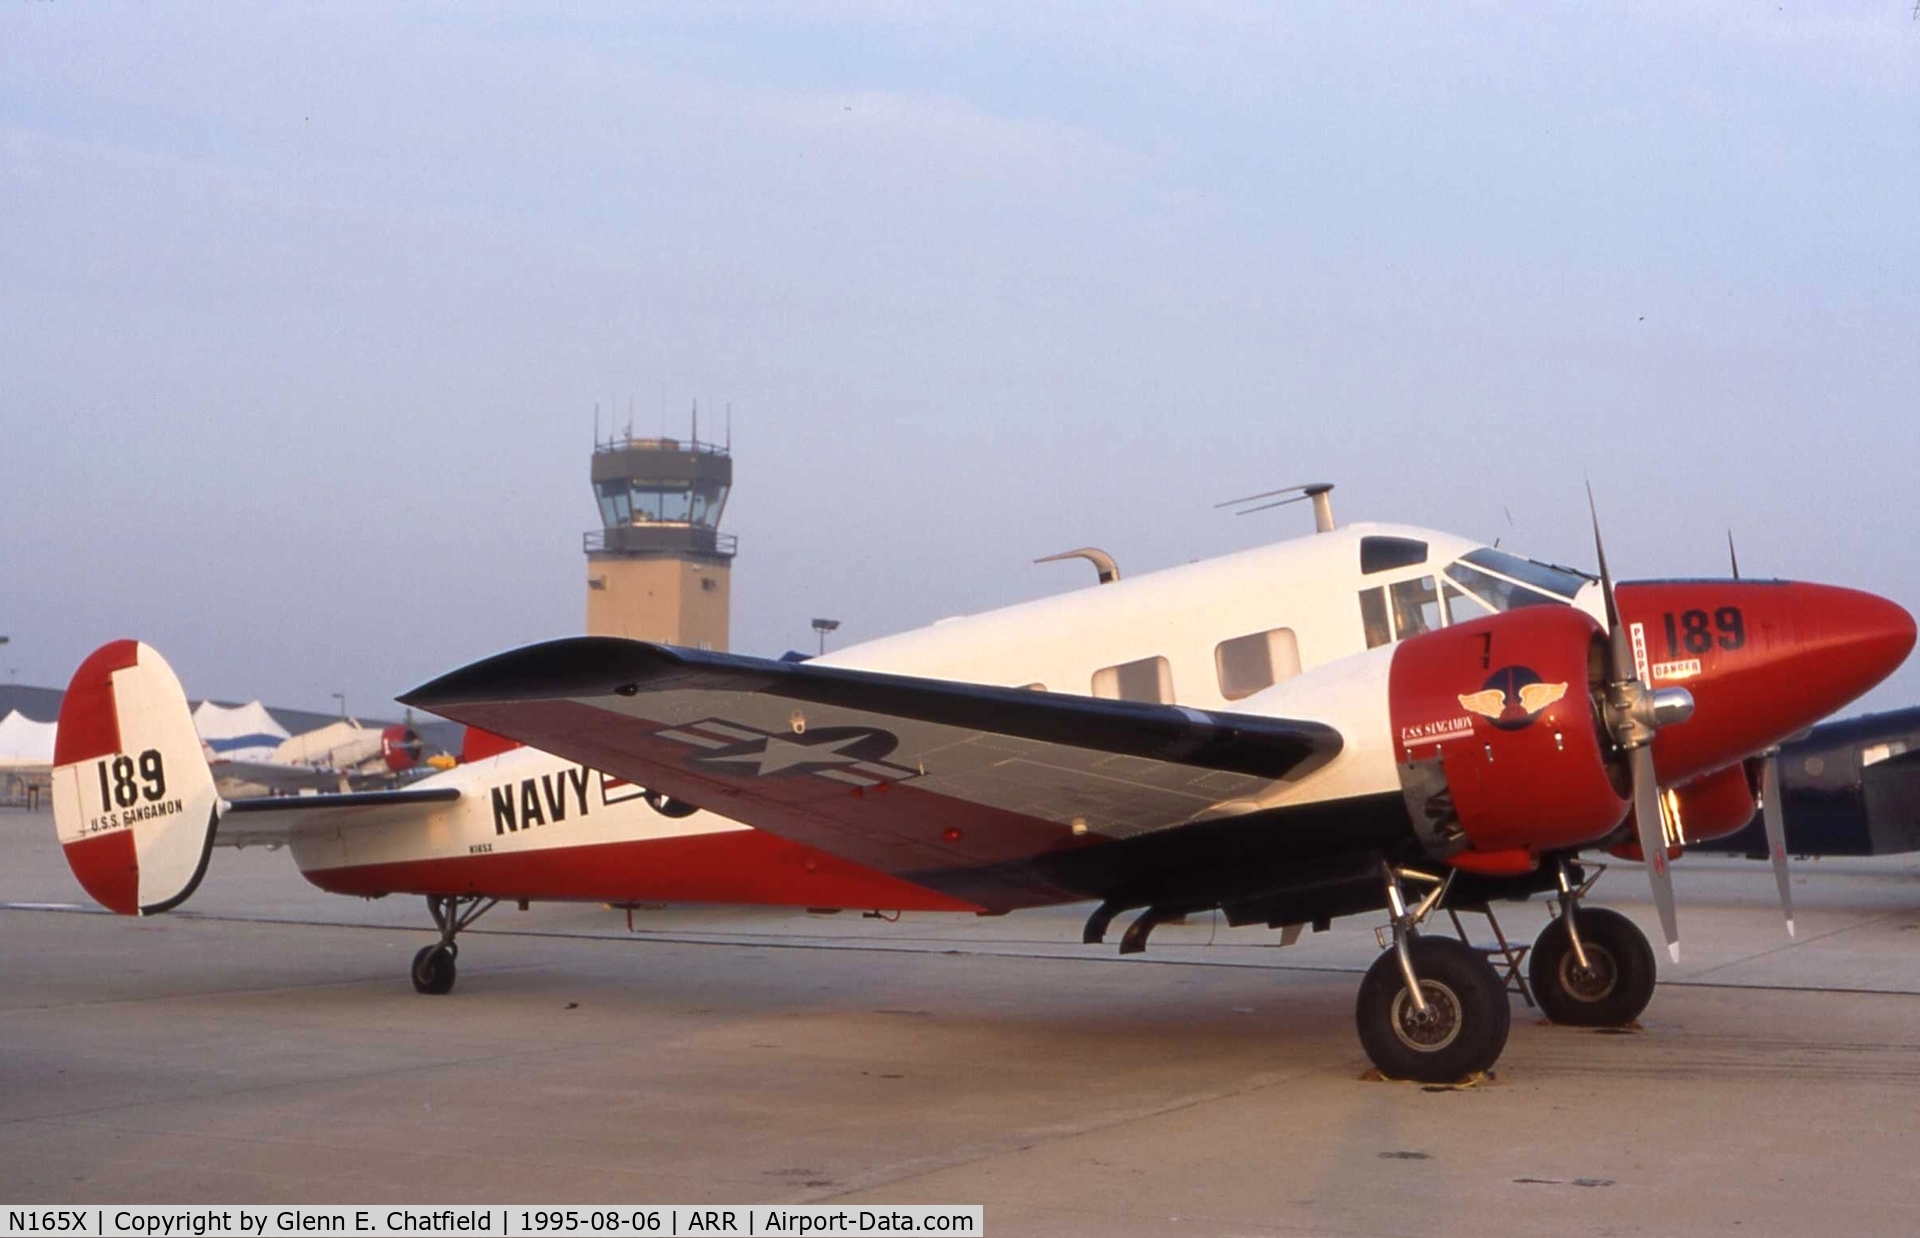 N165X, 1956 Beech E18S C/N BA-189, Nice Navy paint scheme, although I can't find that bird as having been in the Navy